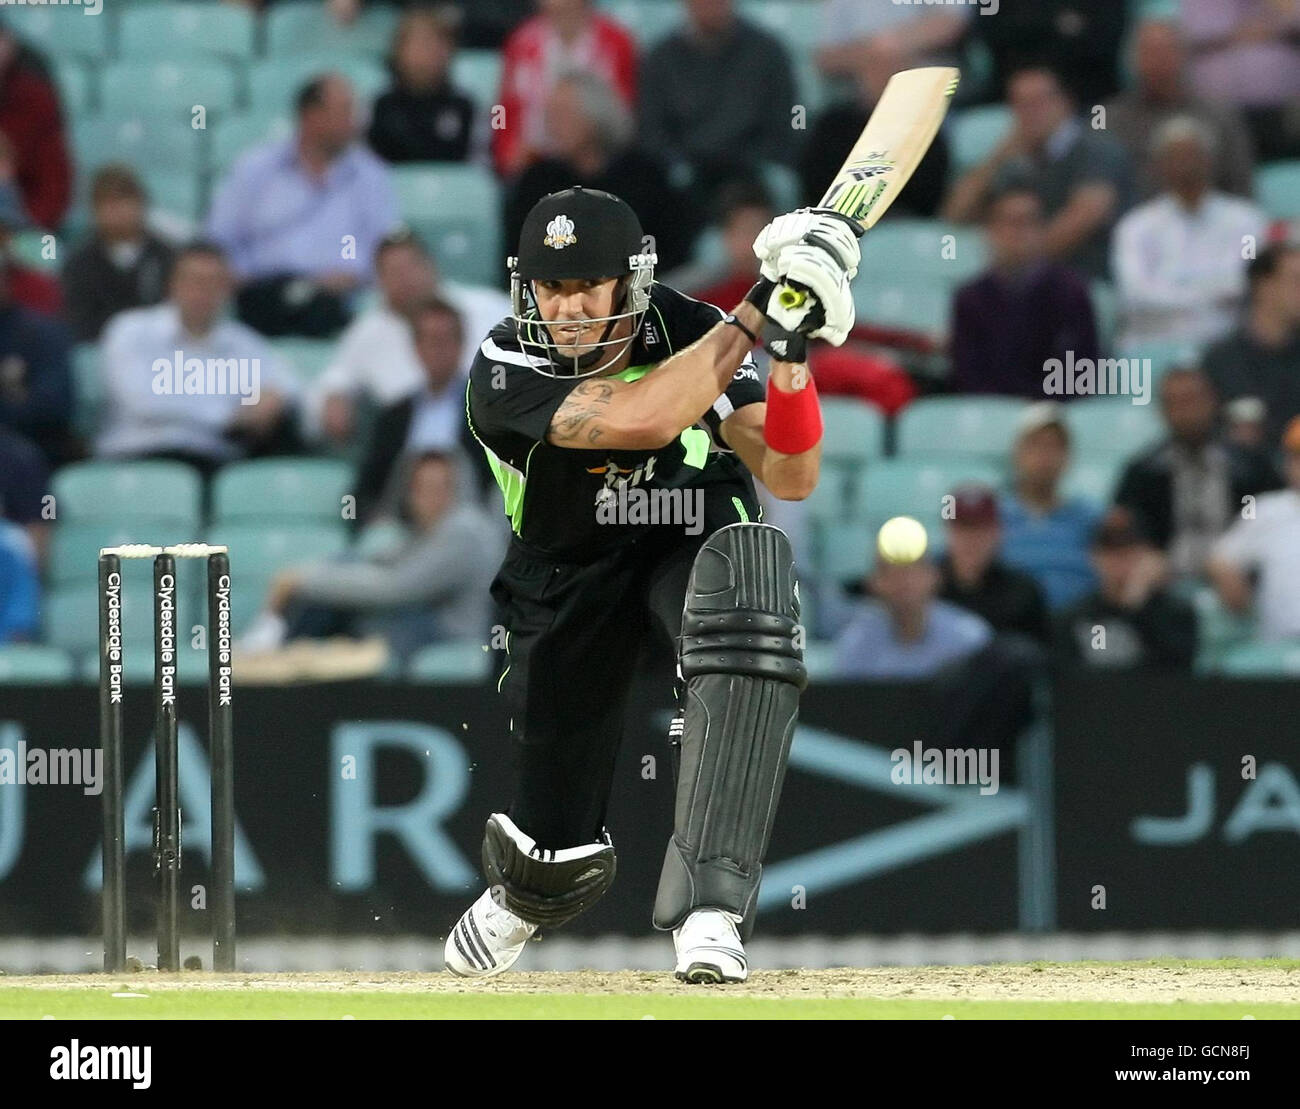 Surrey's Kevin Pietersen bats during the Clydesdale Bank 40 match at the The Brit Insurance Oval, London. Stock Photo